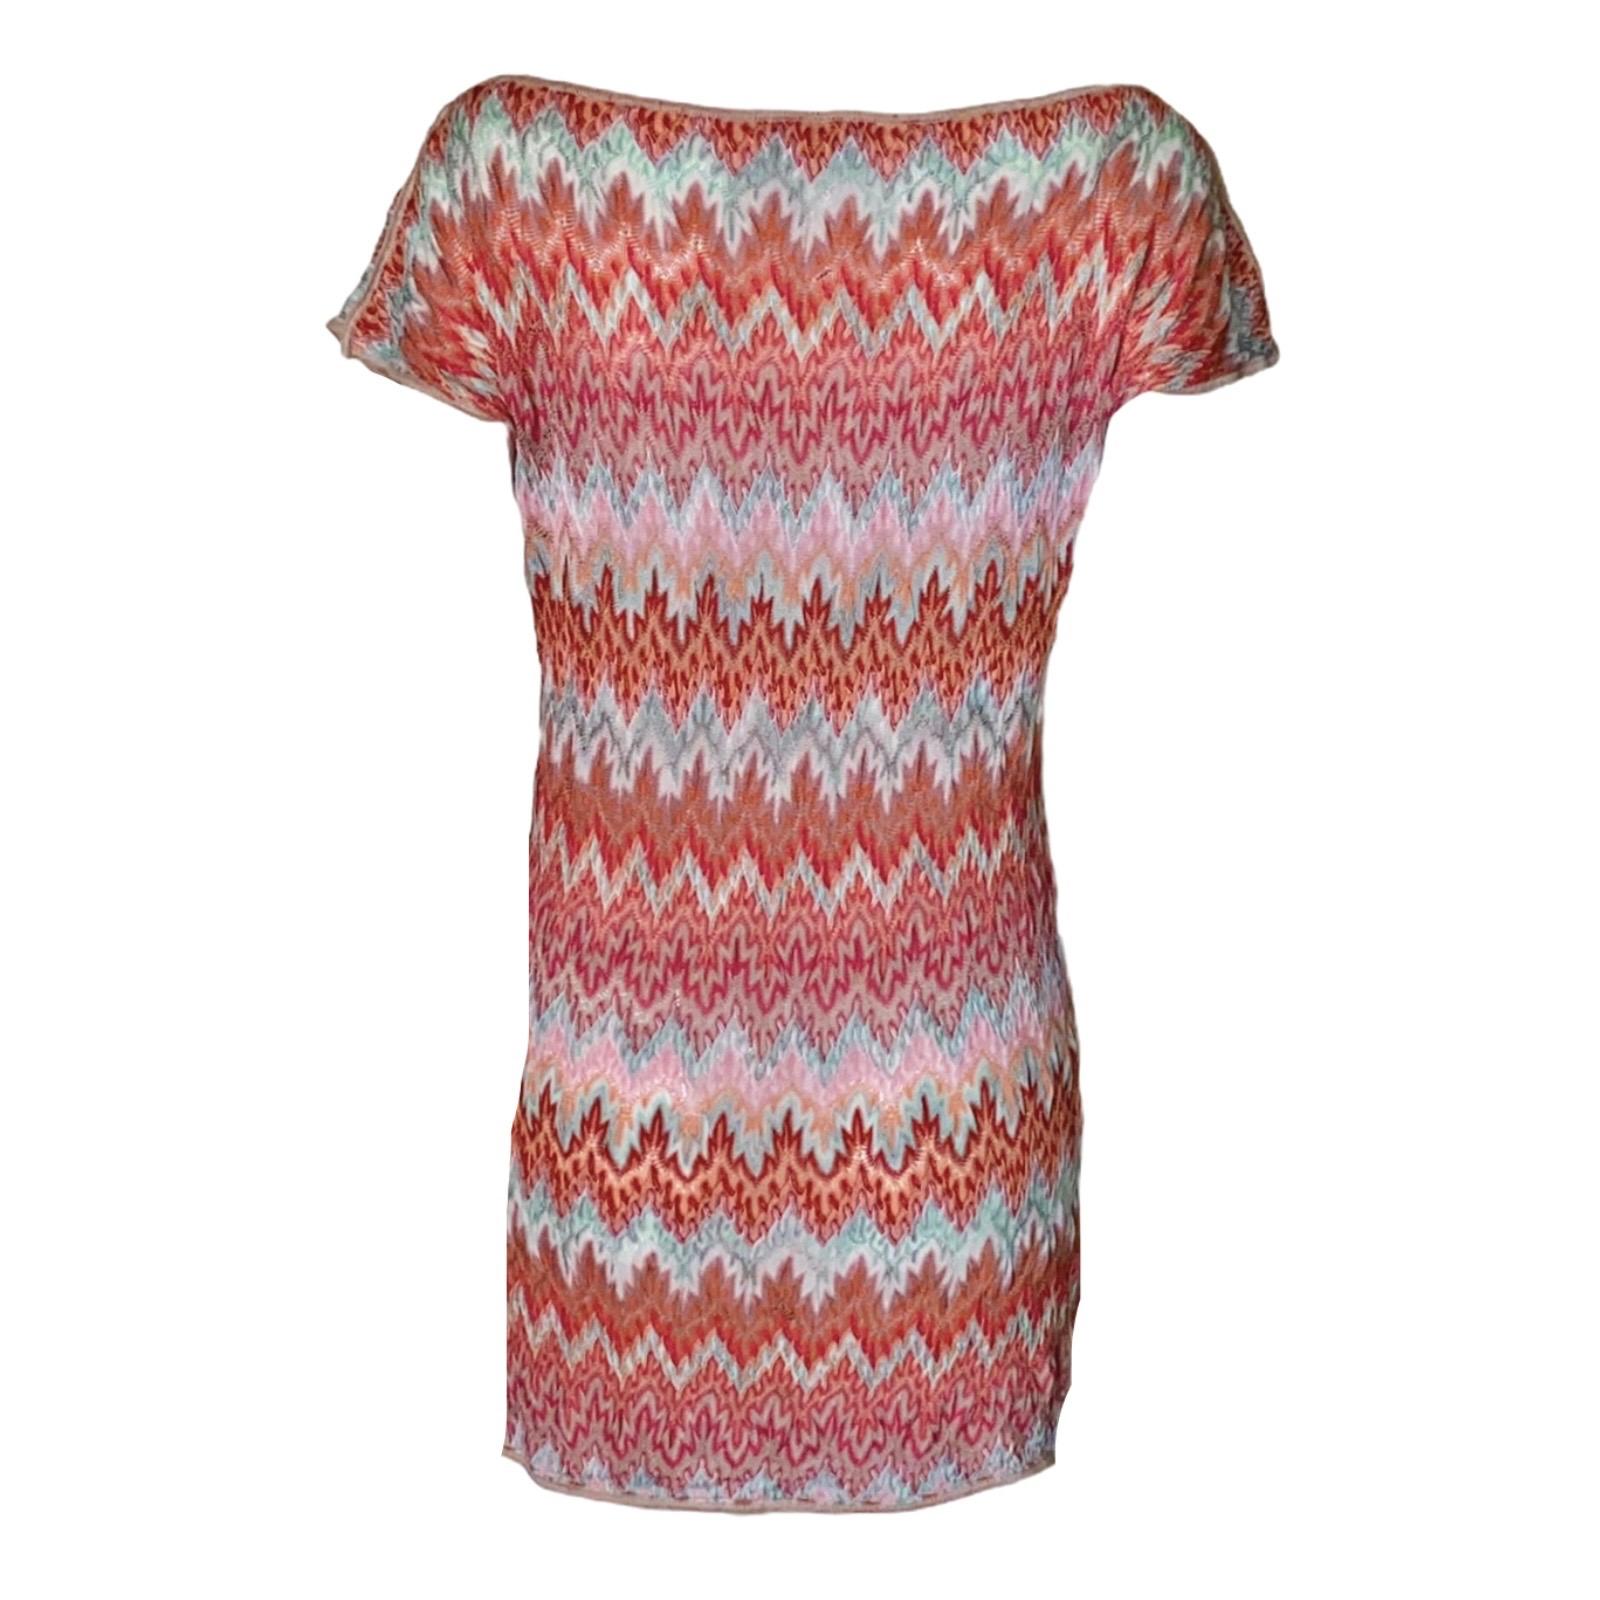 This stunning multicolored Missoni knitted mini dress epitomizes jet-set glamour. The signature geometric weave will update your look in a flash.

DETAILS:

Beautiful multicolor & pink shades
Missoni signature geometric weave
Boat neck
Vented cap